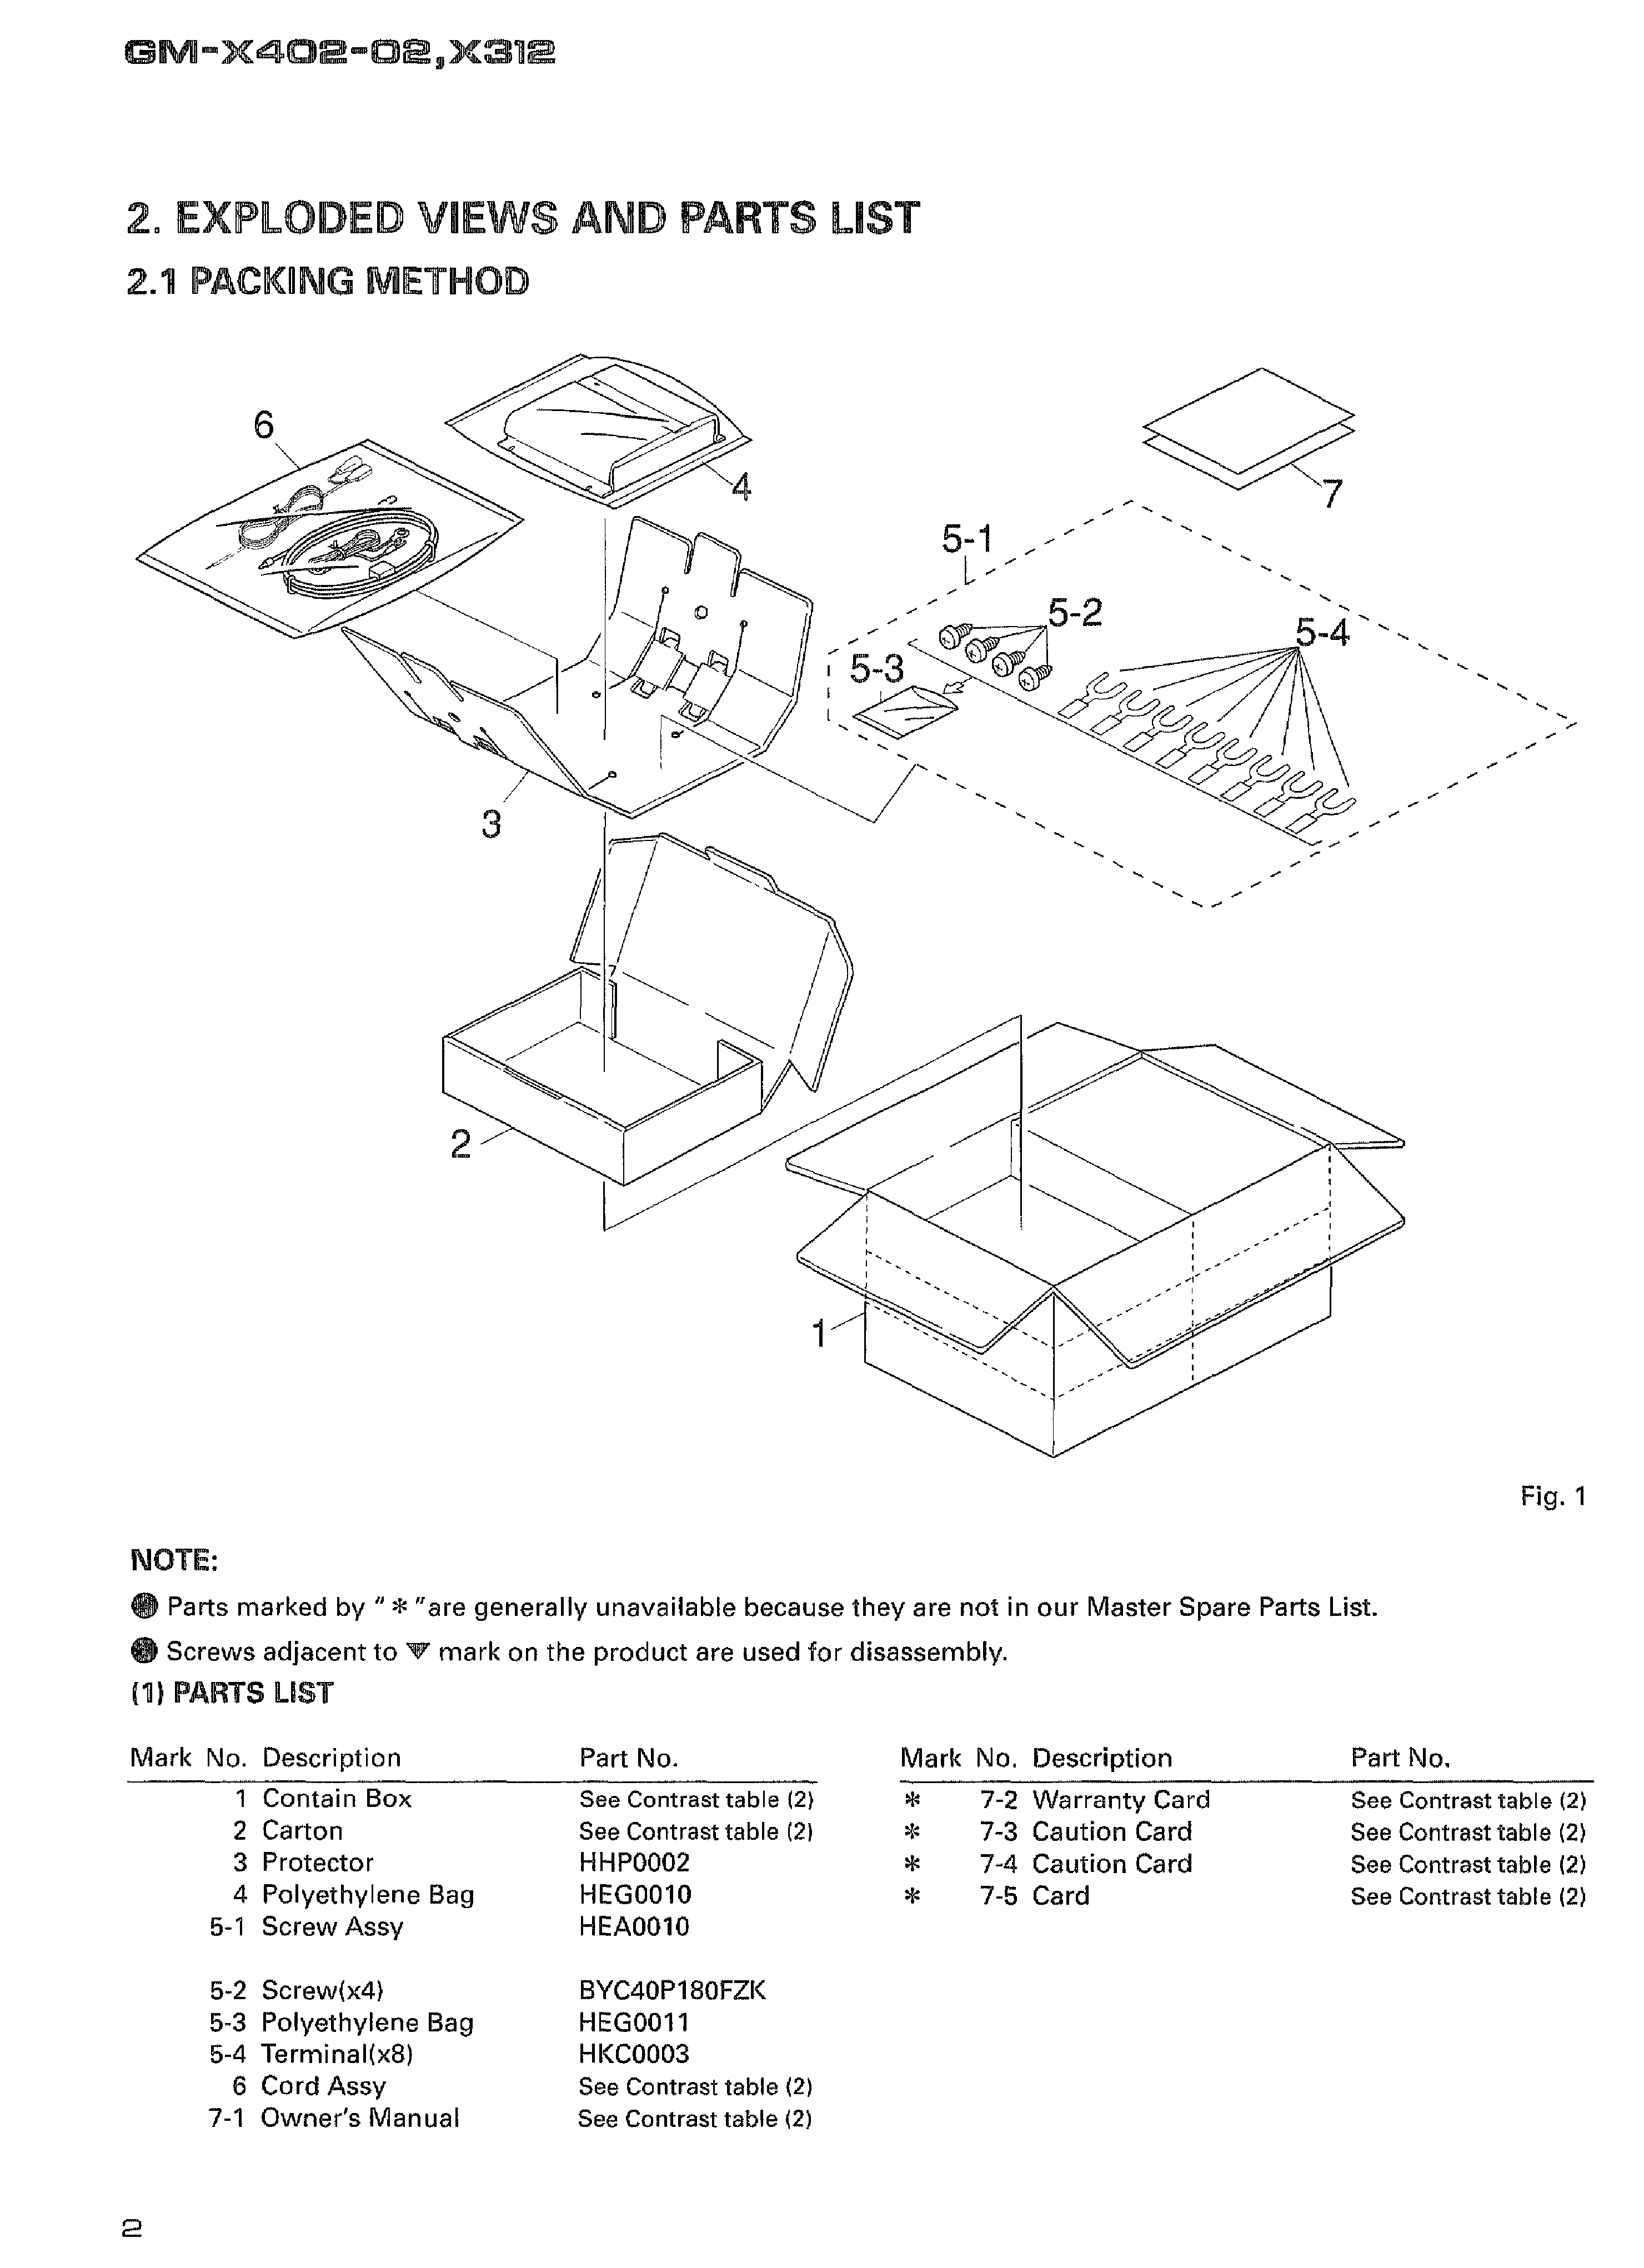 PIONEER GM-X312 402 service manual (2nd page)